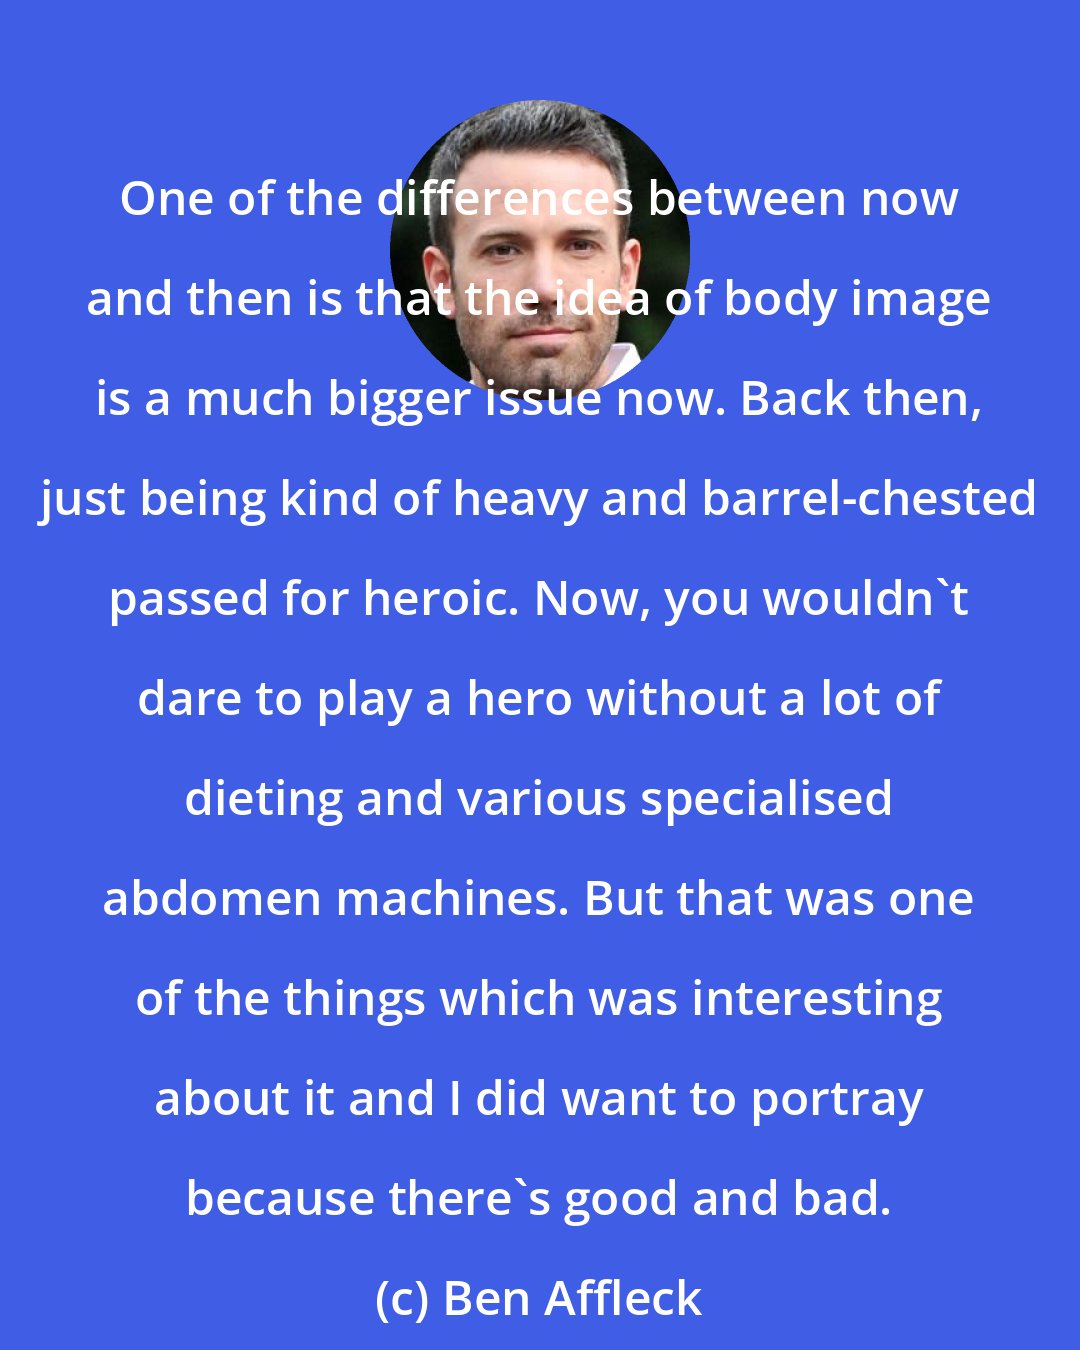 Ben Affleck: One of the differences between now and then is that the idea of body image is a much bigger issue now. Back then, just being kind of heavy and barrel-chested passed for heroic. Now, you wouldn't dare to play a hero without a lot of dieting and various specialised abdomen machines. But that was one of the things which was interesting about it and I did want to portray because there's good and bad.